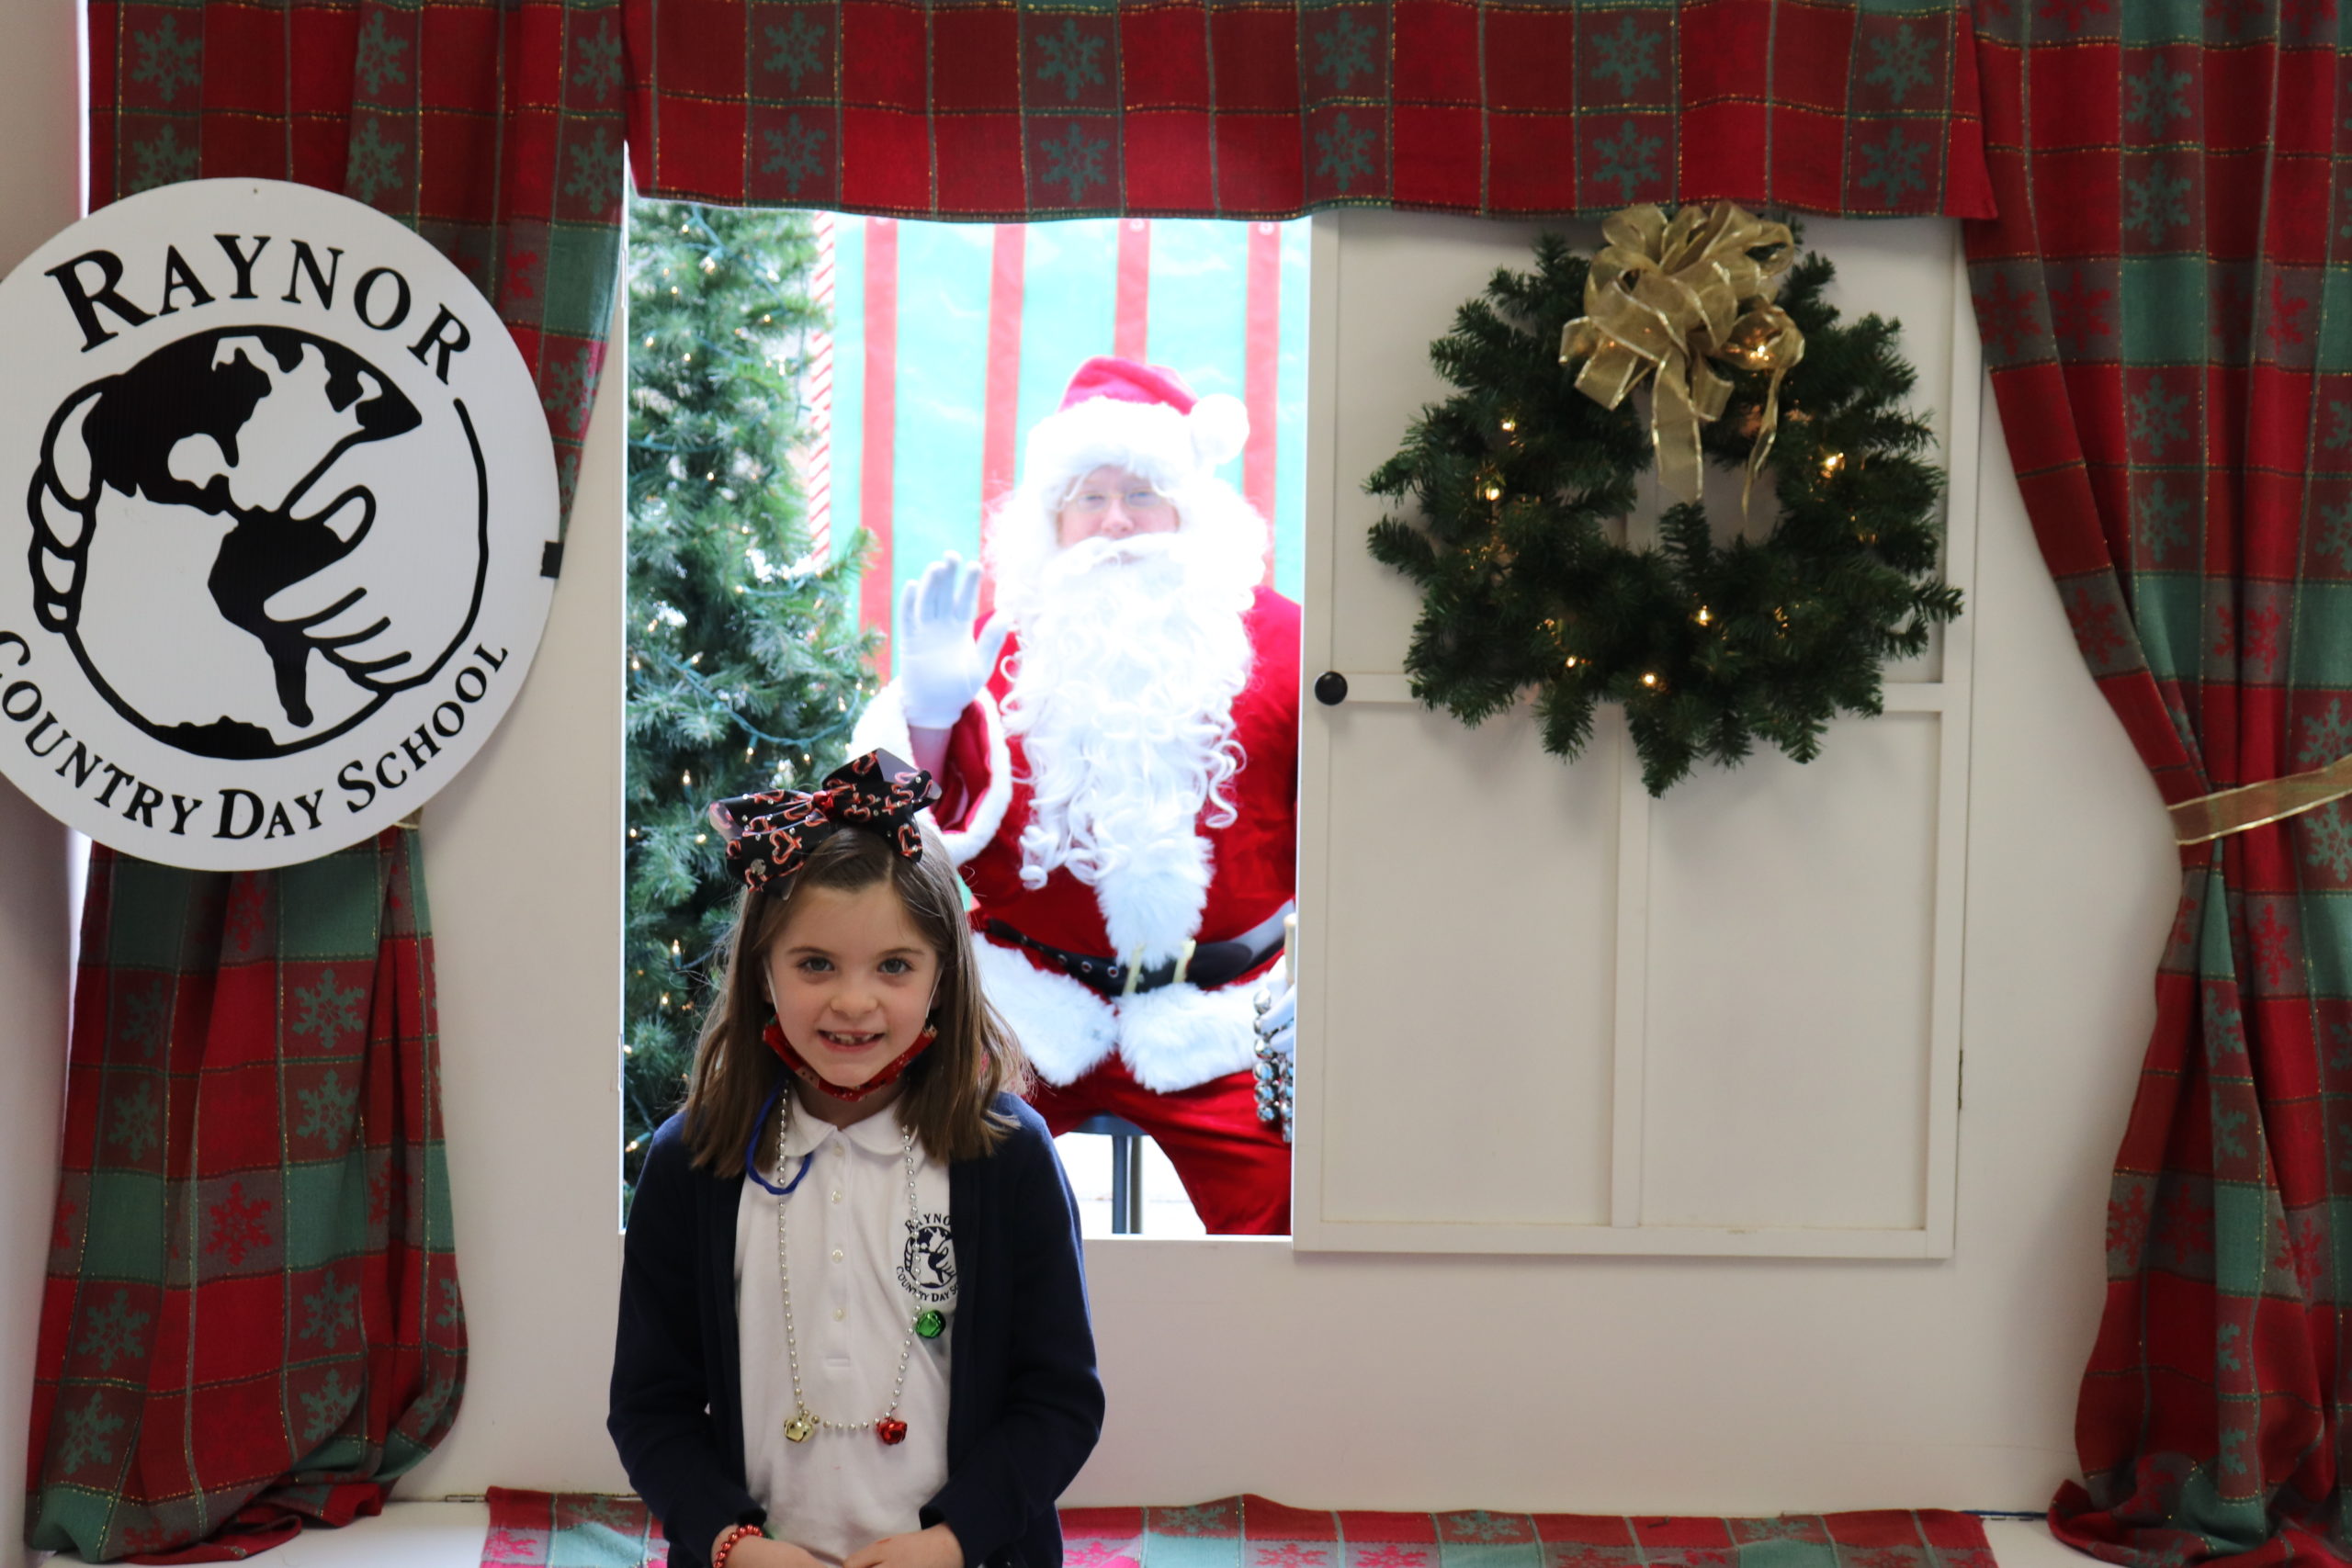 First-grade student, Keira Raymond, is all smiles after meeting with Santa at Raynor Country Day School's annual Holiday Festival.